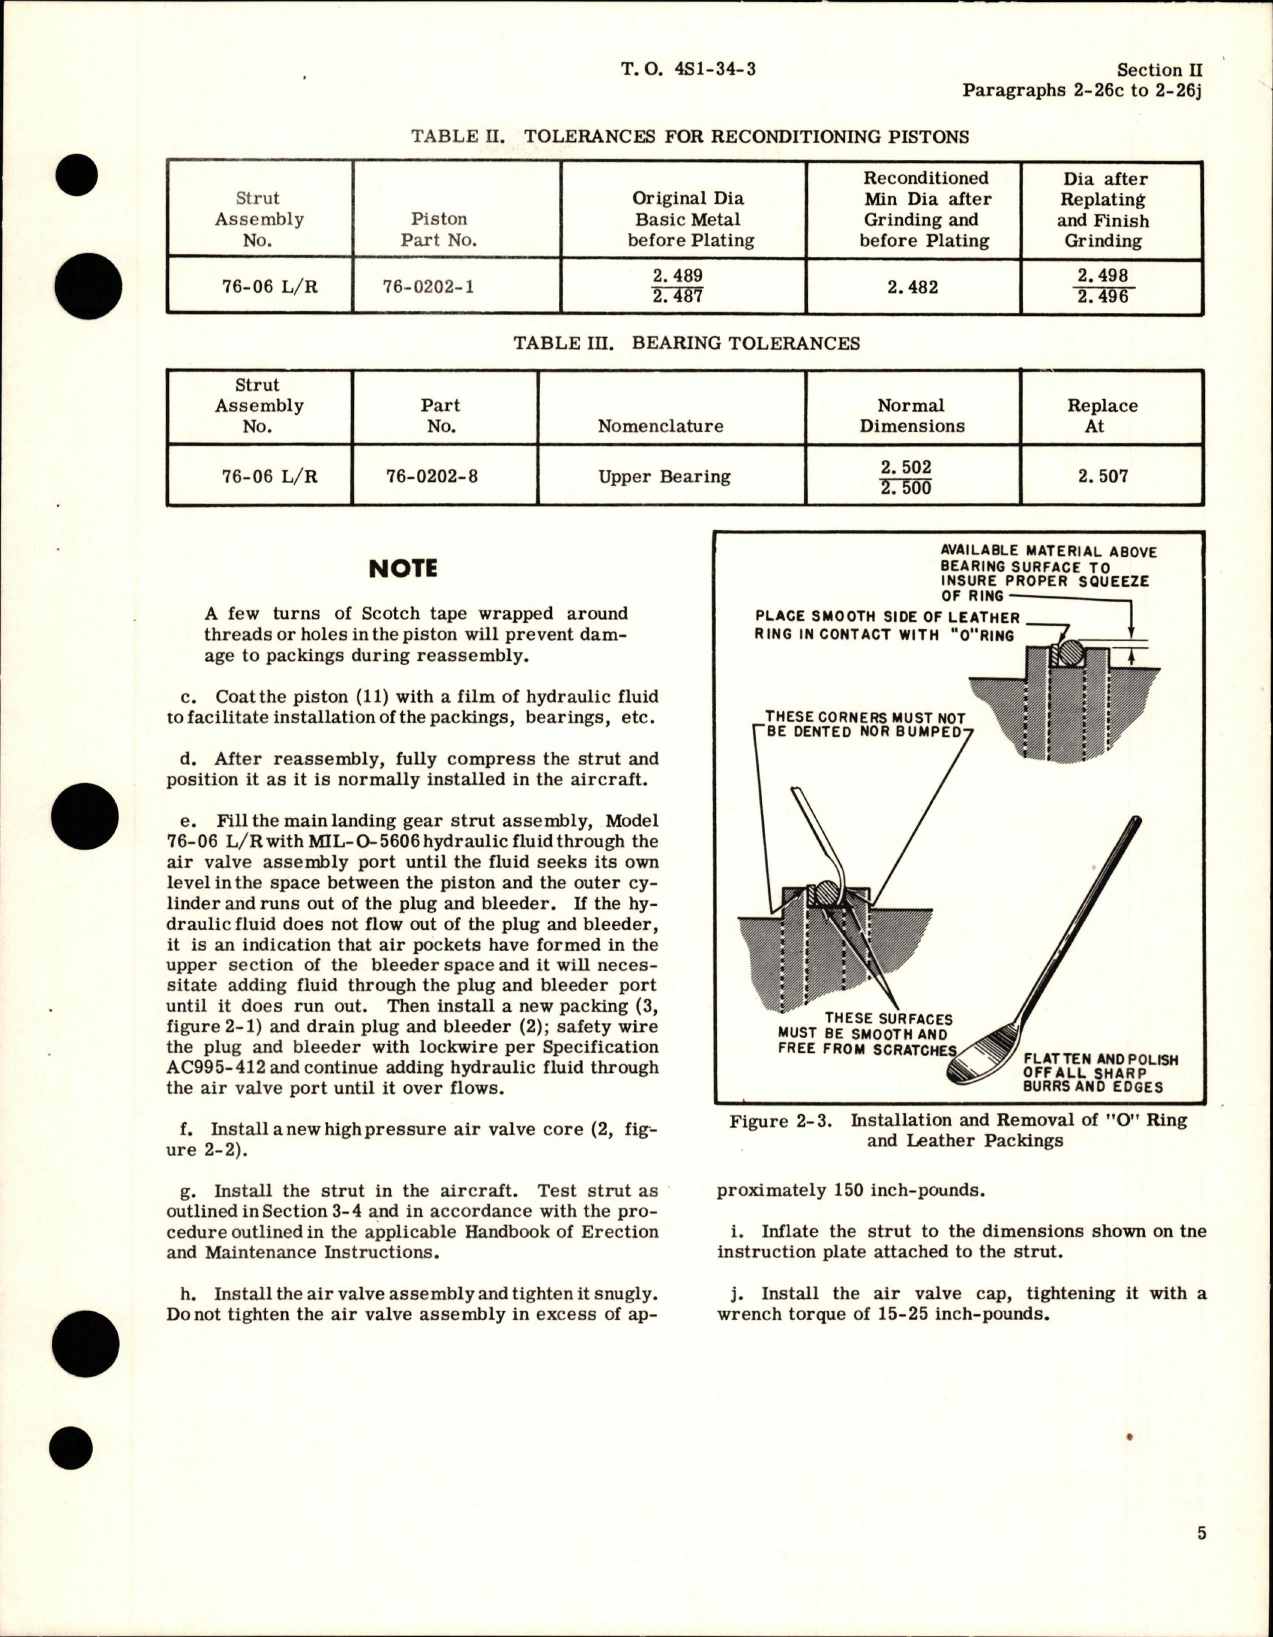 Sample page 7 from AirCorps Library document: Overhaul Instructions for Main Landing Gear Strut Assembly - Models 76-02, 76-04, and 76-06